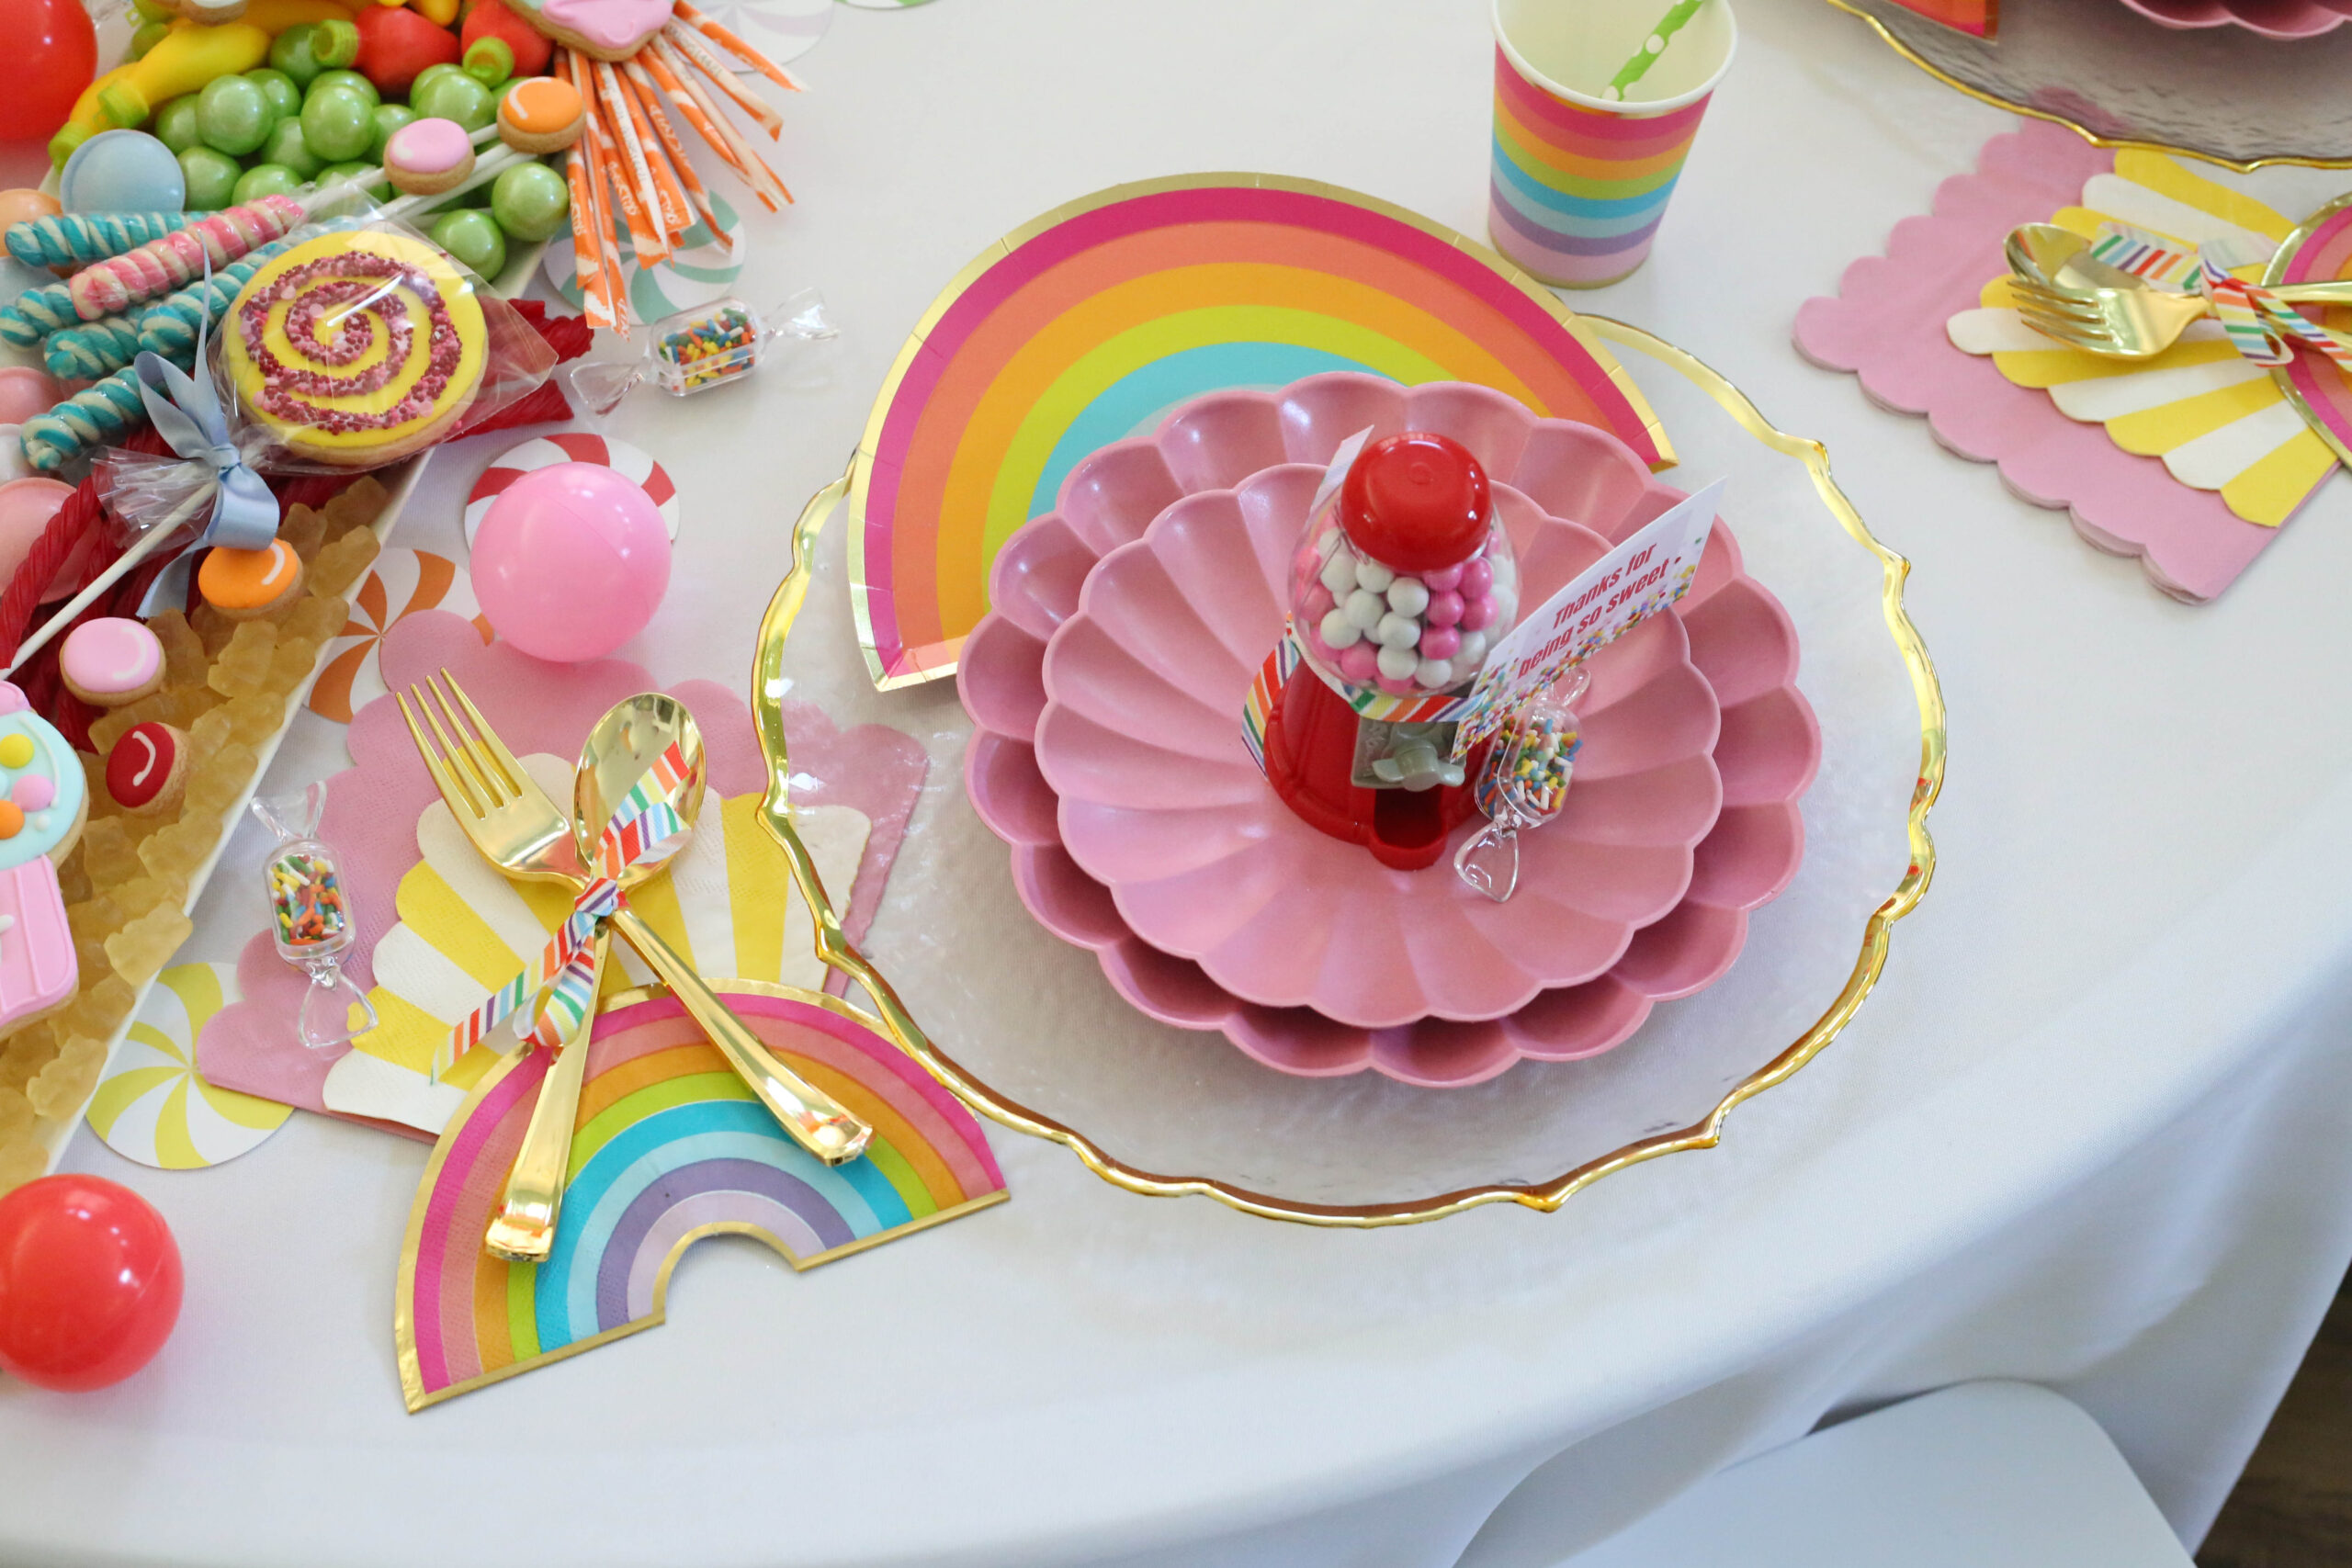 candy party place setting at a round table with a white table cloth